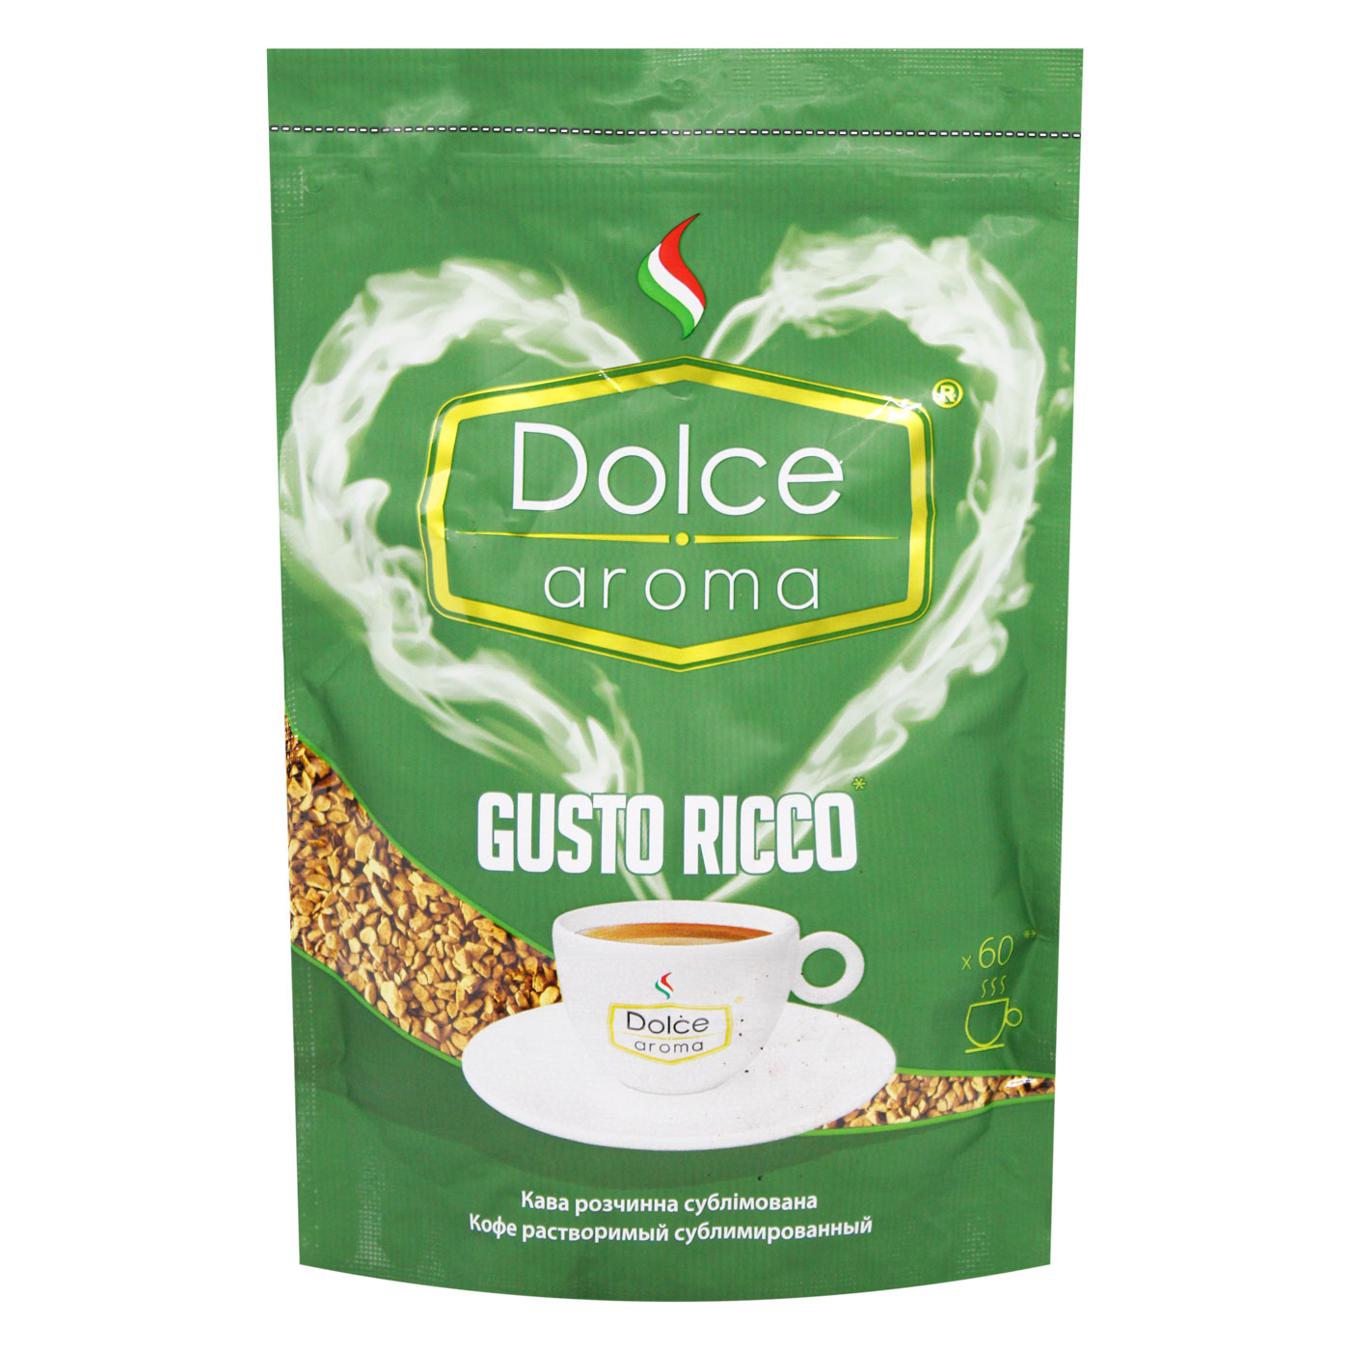 Dolce Aroma Gusto Ricco instant coffee 120 g